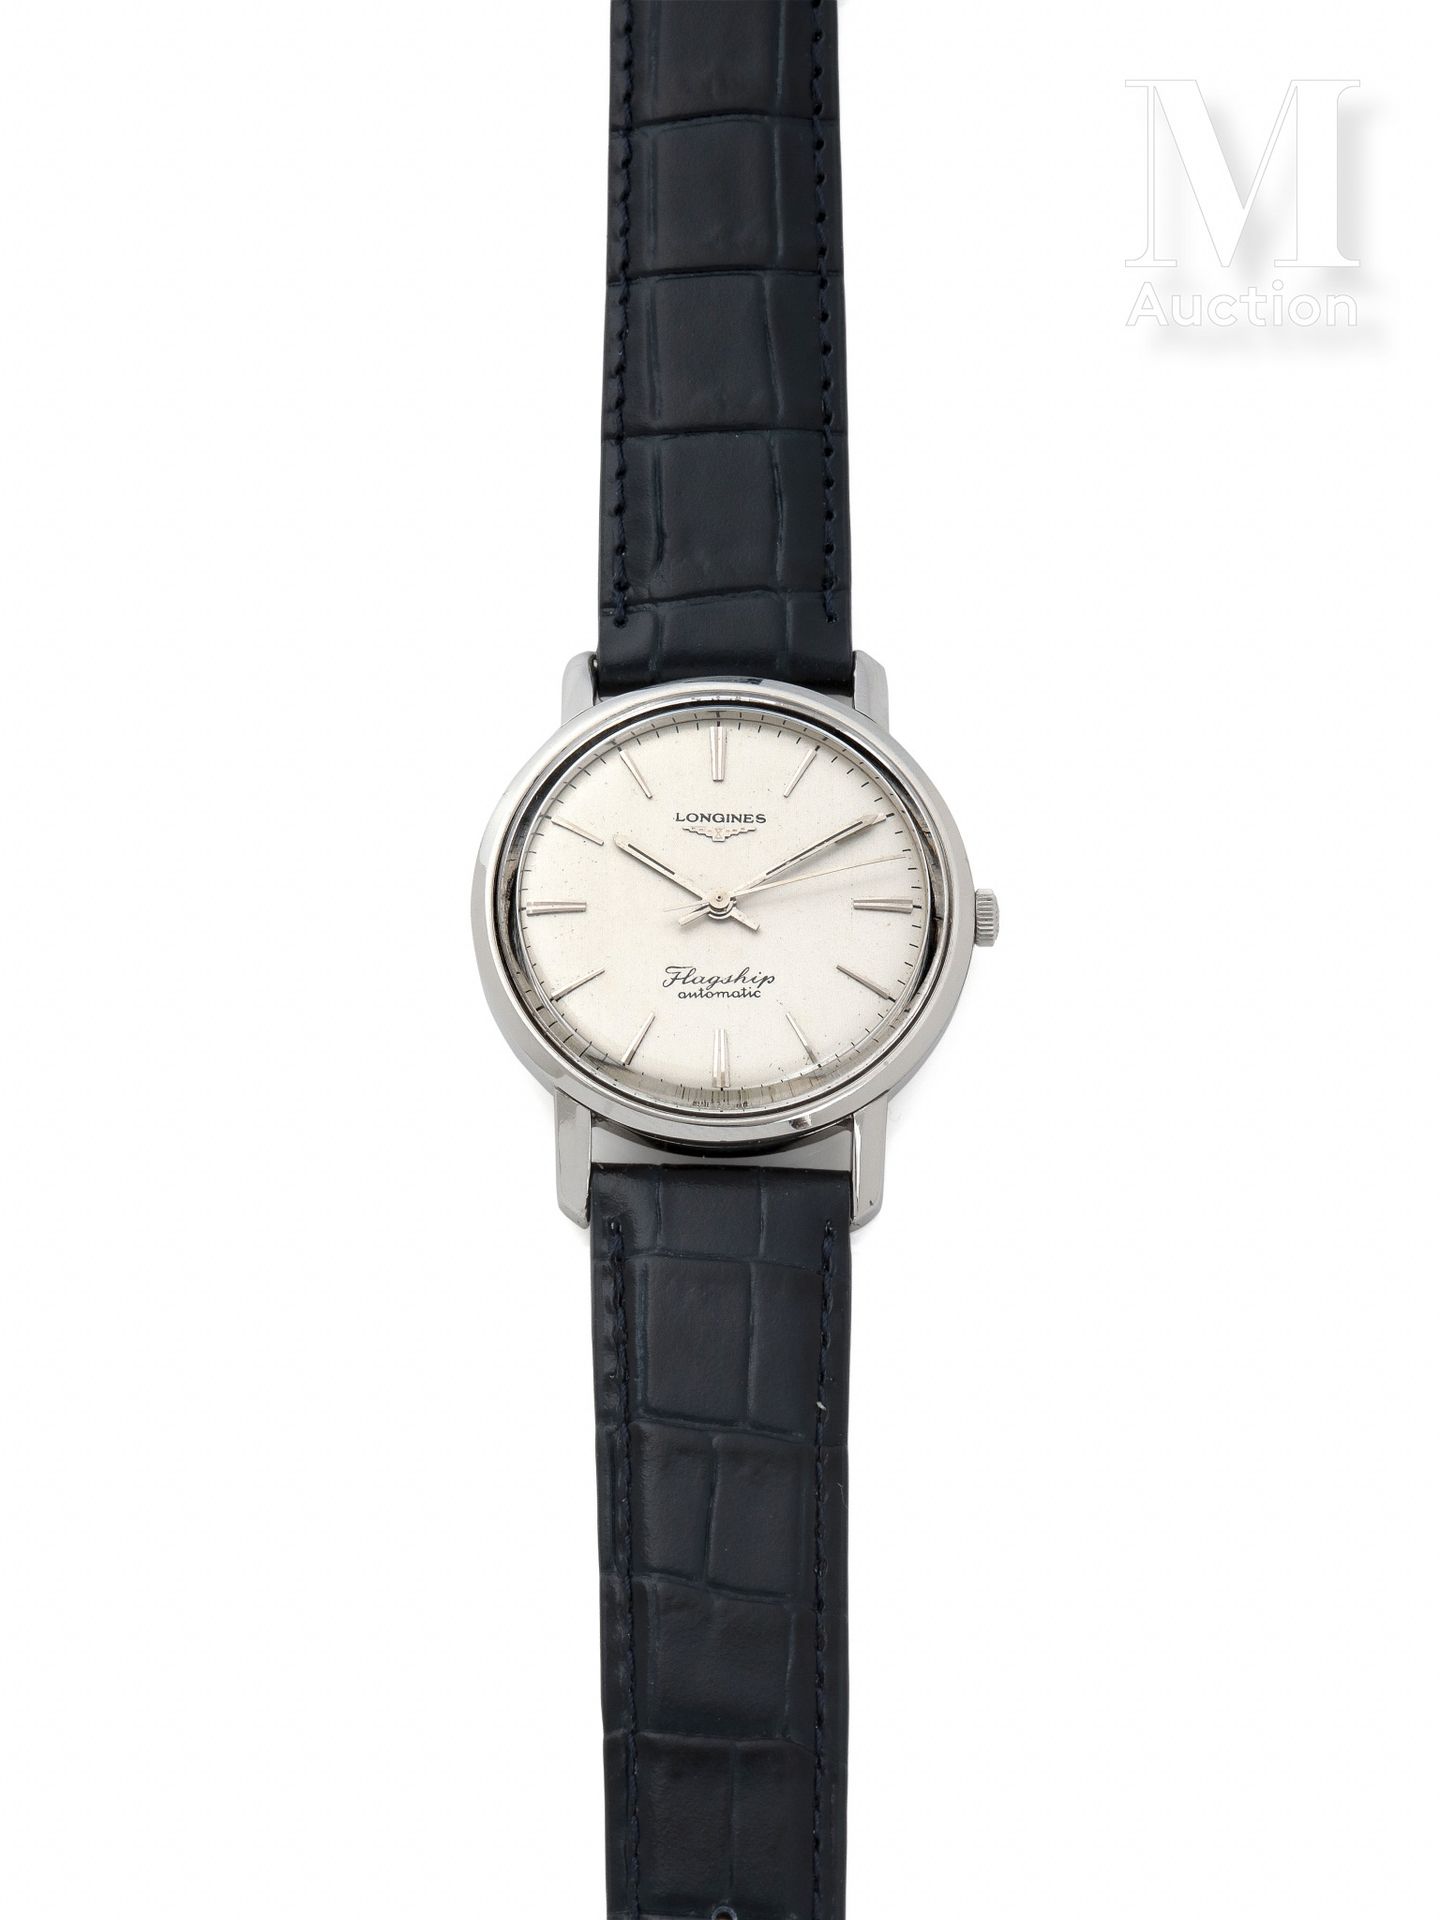 LONGINES Flagship

Catalogue number : 3104

Circa 1960

Men's round watch in ste&hellip;